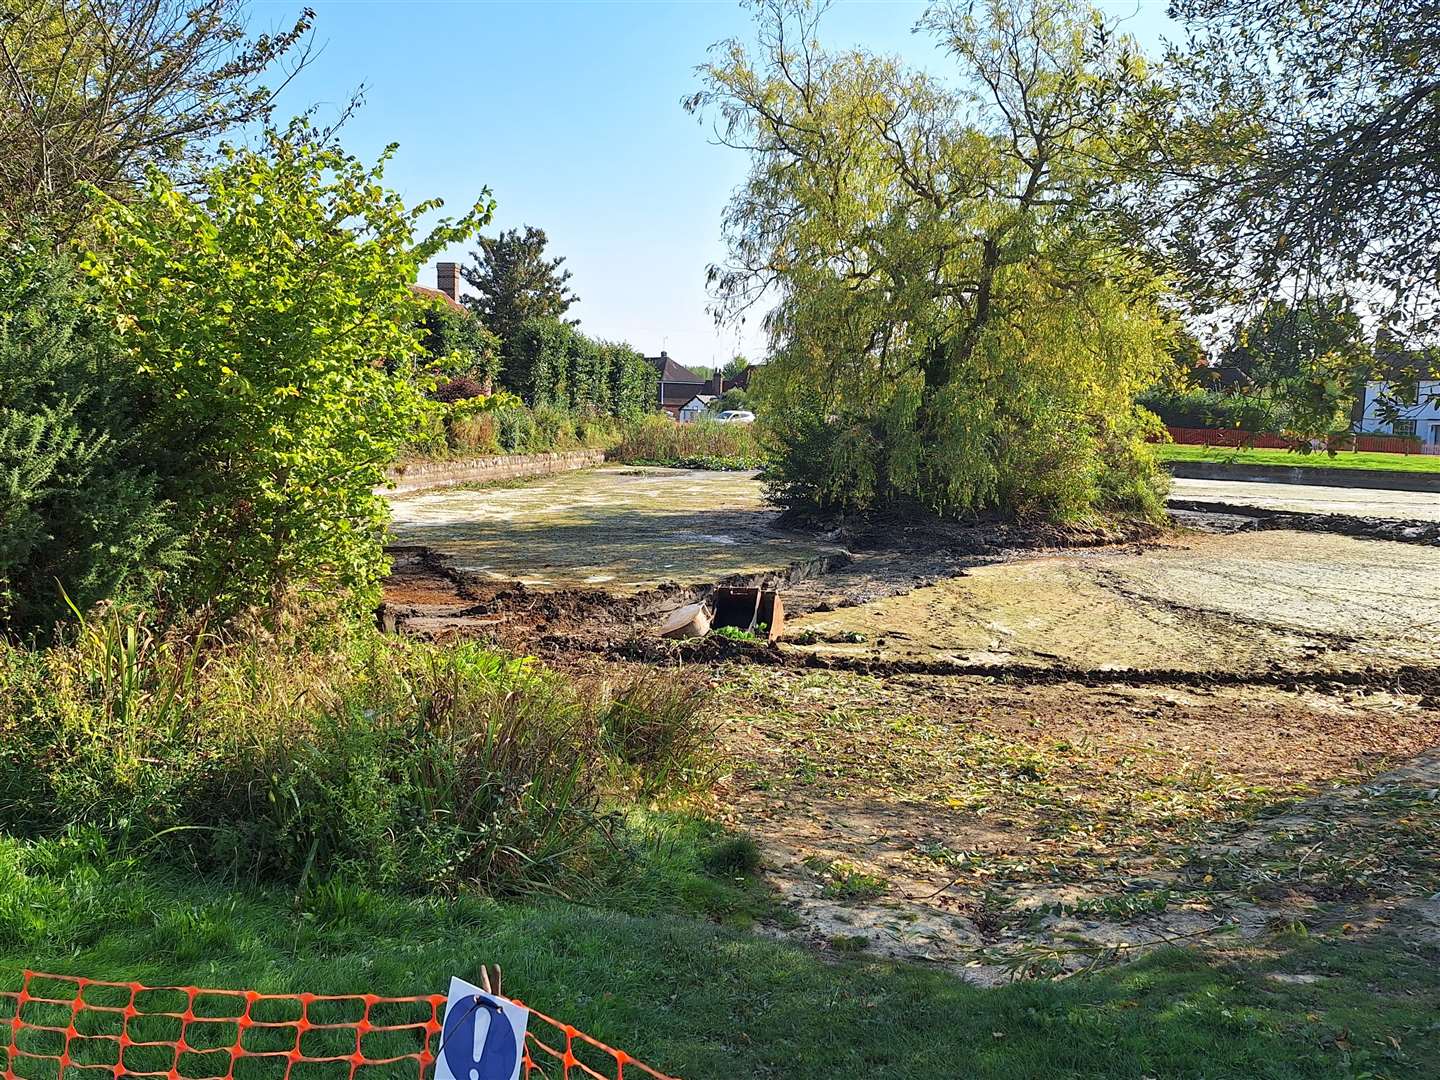 The next phase of works has started to secure the pond’s future